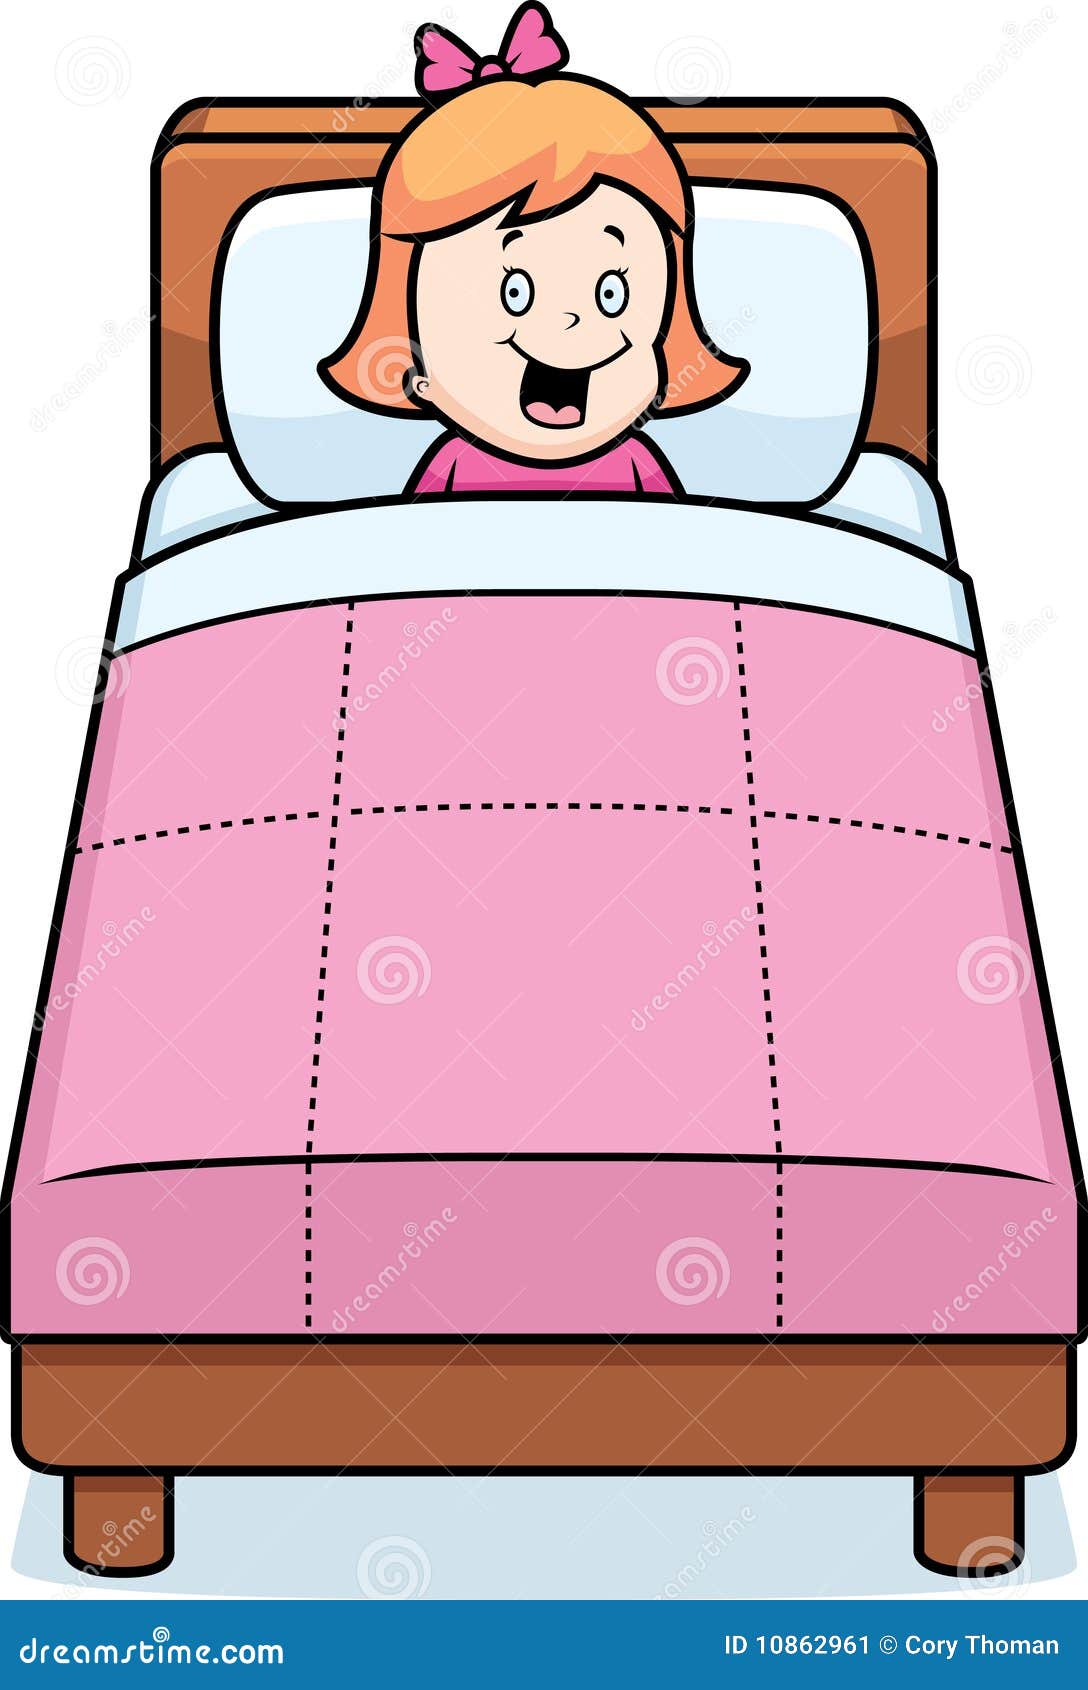 cartoon girl in bed and ready to go to sleep.